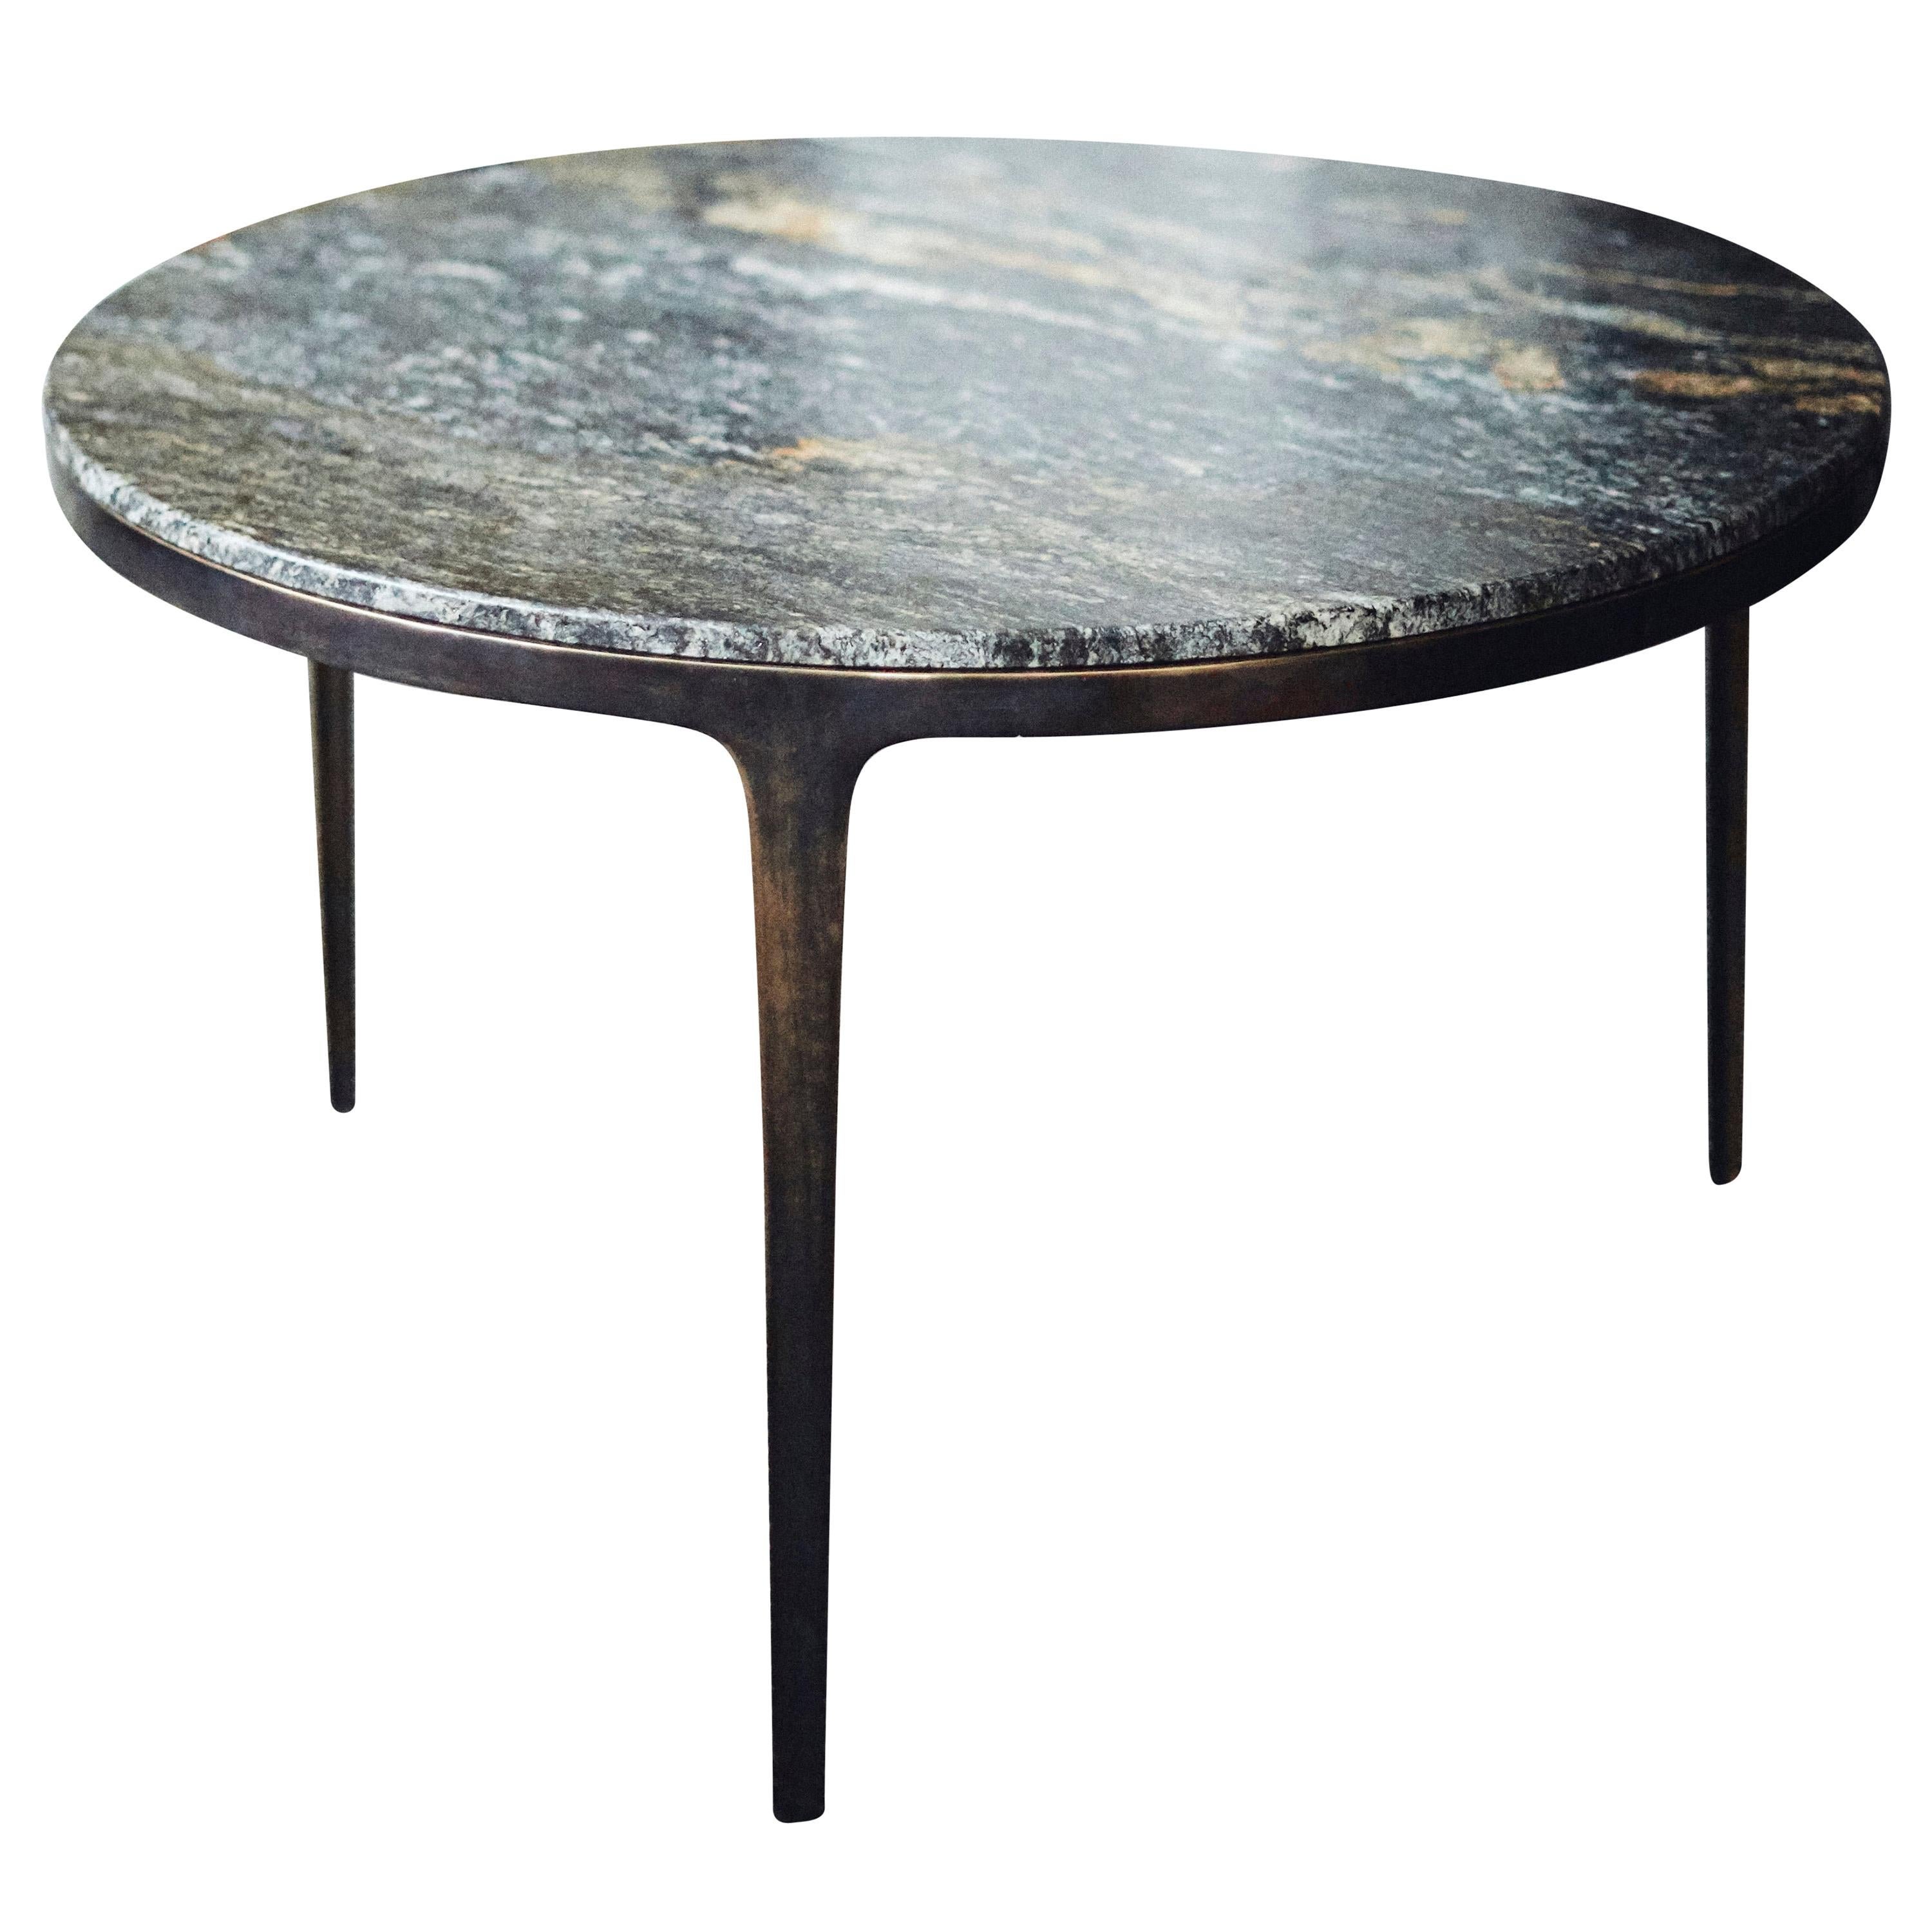 Barbera 'Bronze' Round Table, Modern Solid Bronze Base with Granite Stone Top